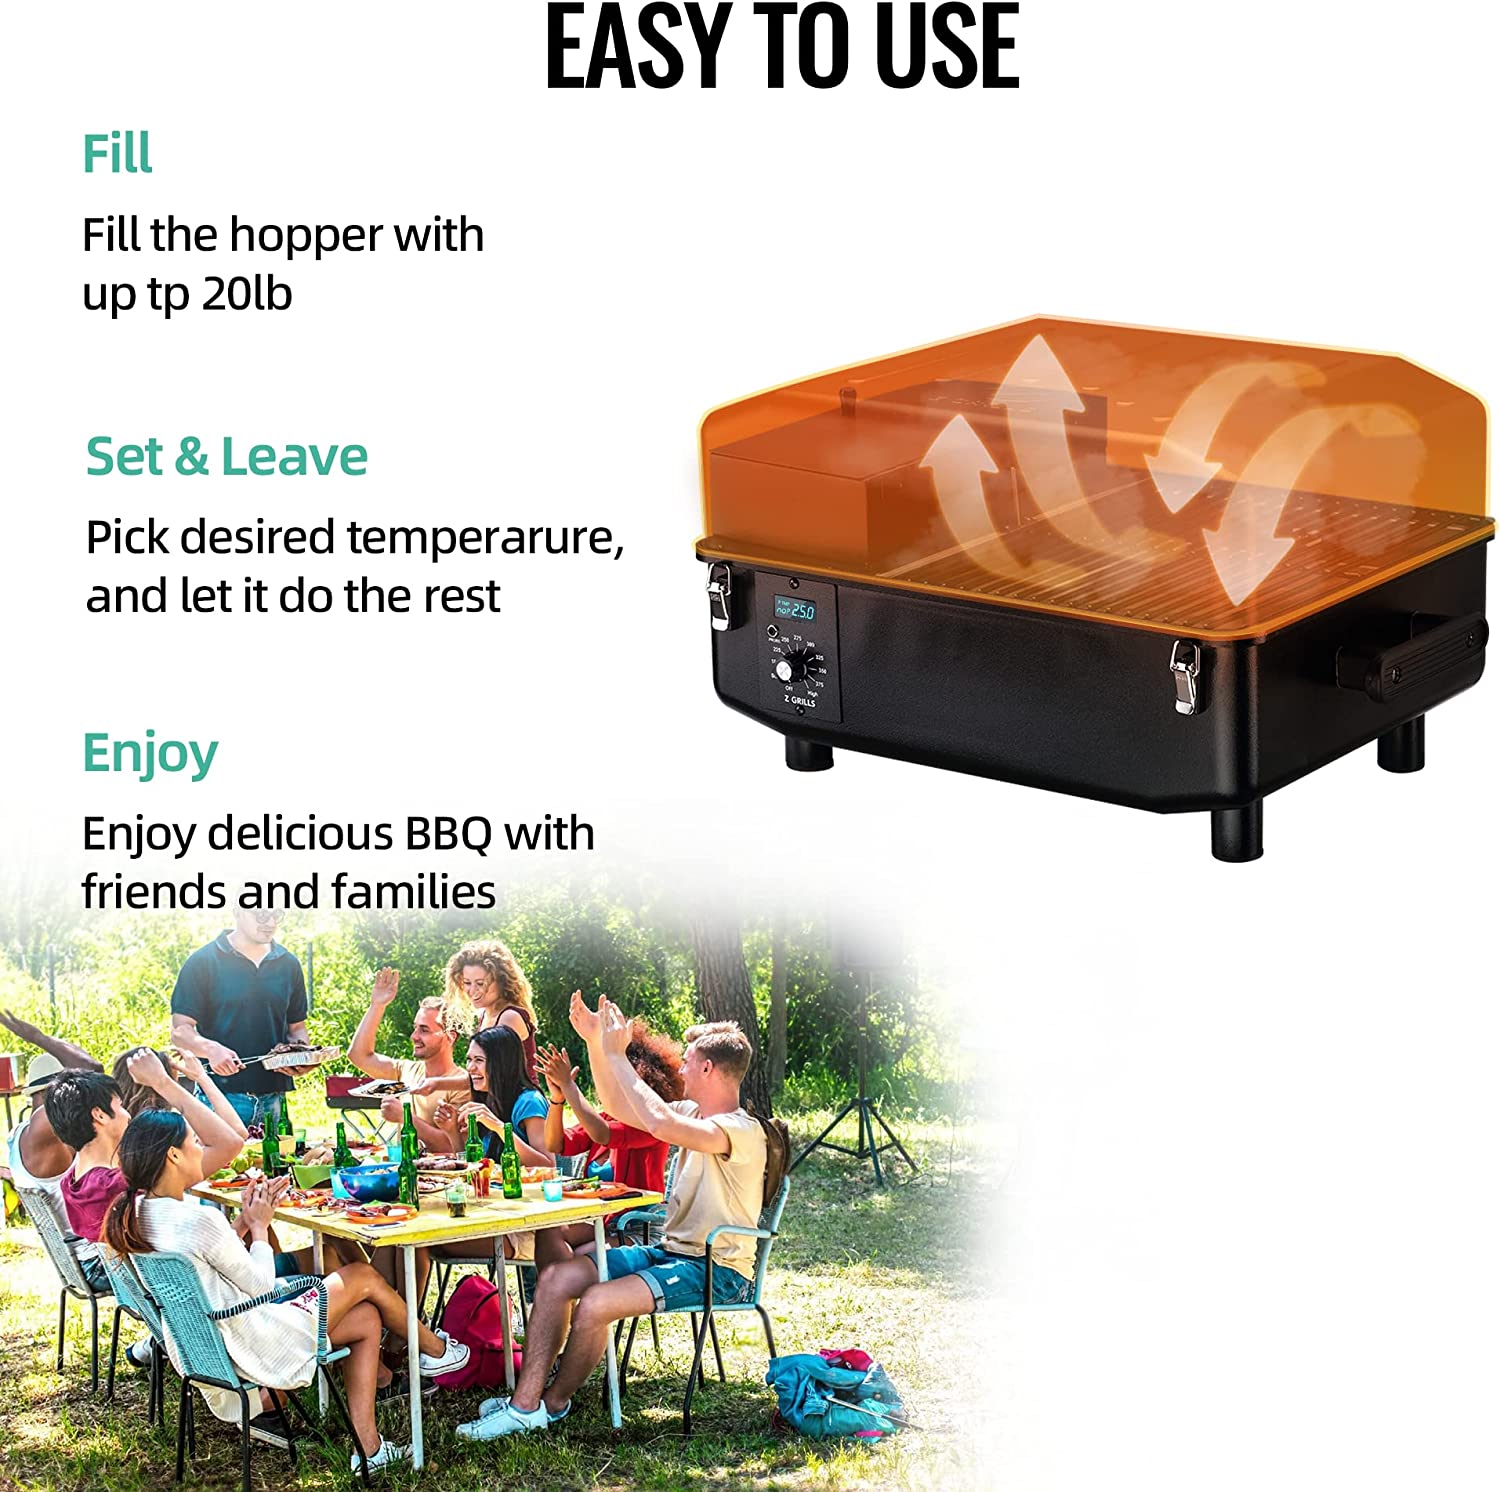 Z GRILLS 202 sq. in. Portable Pellet Grill & Electric Smoker